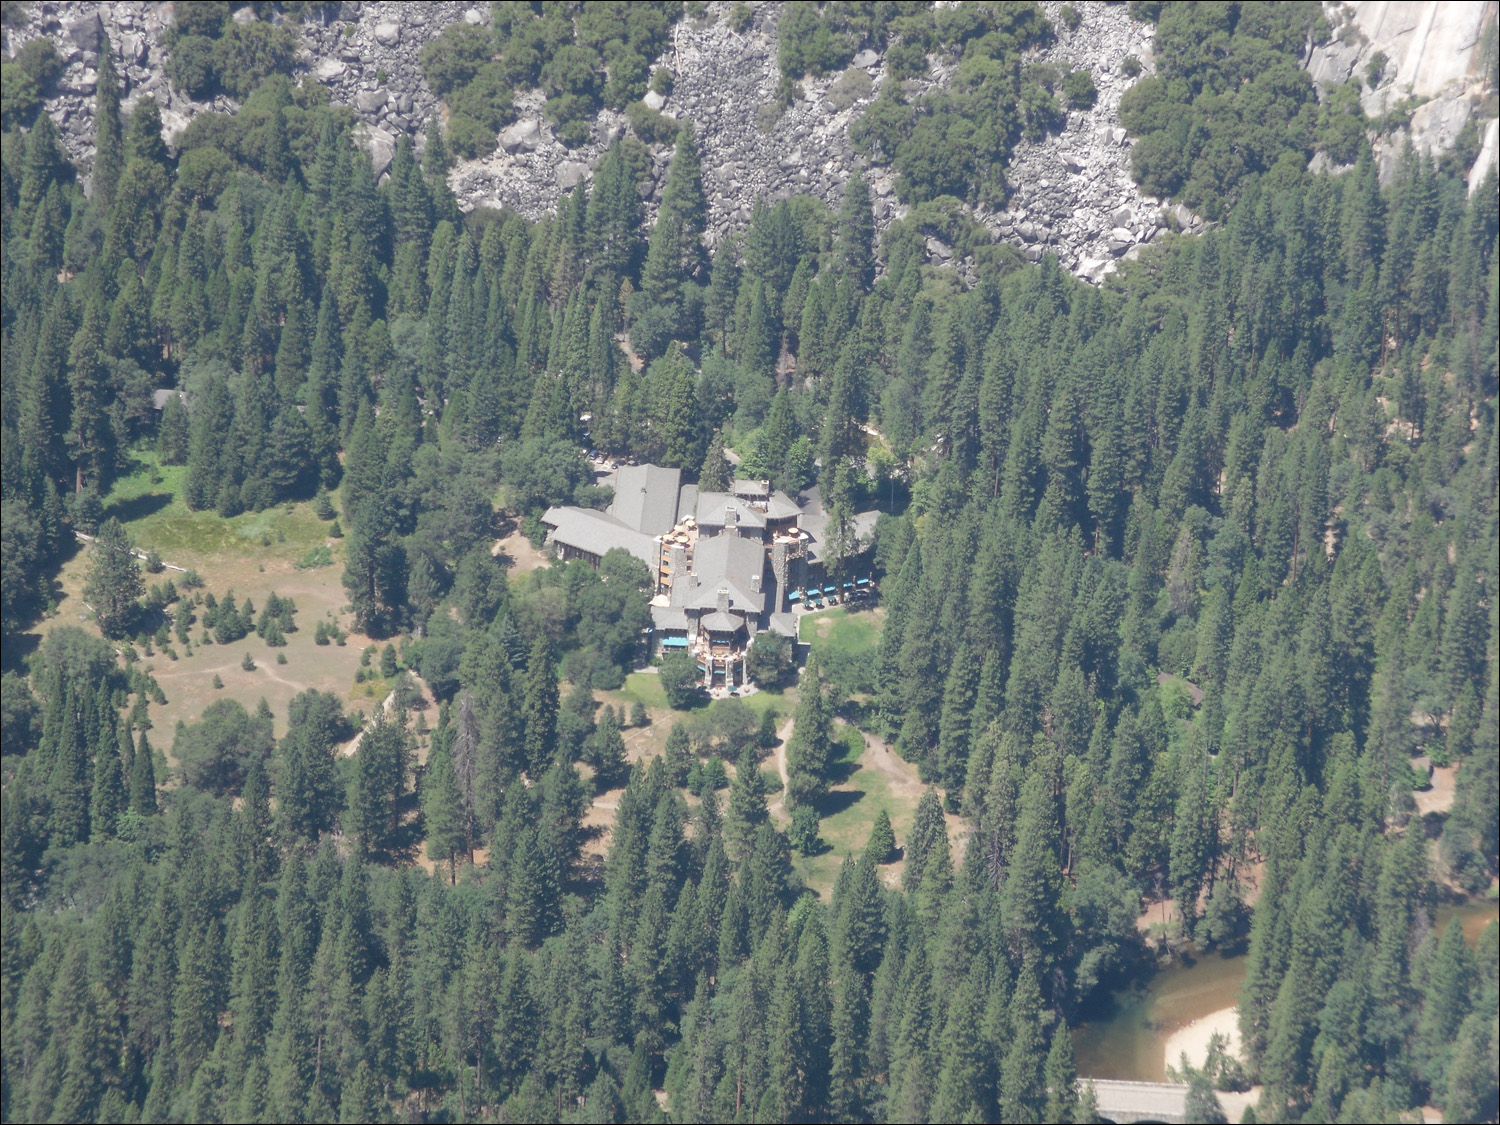 Hike to Glacier Point-View of Ahwahnee Hotel